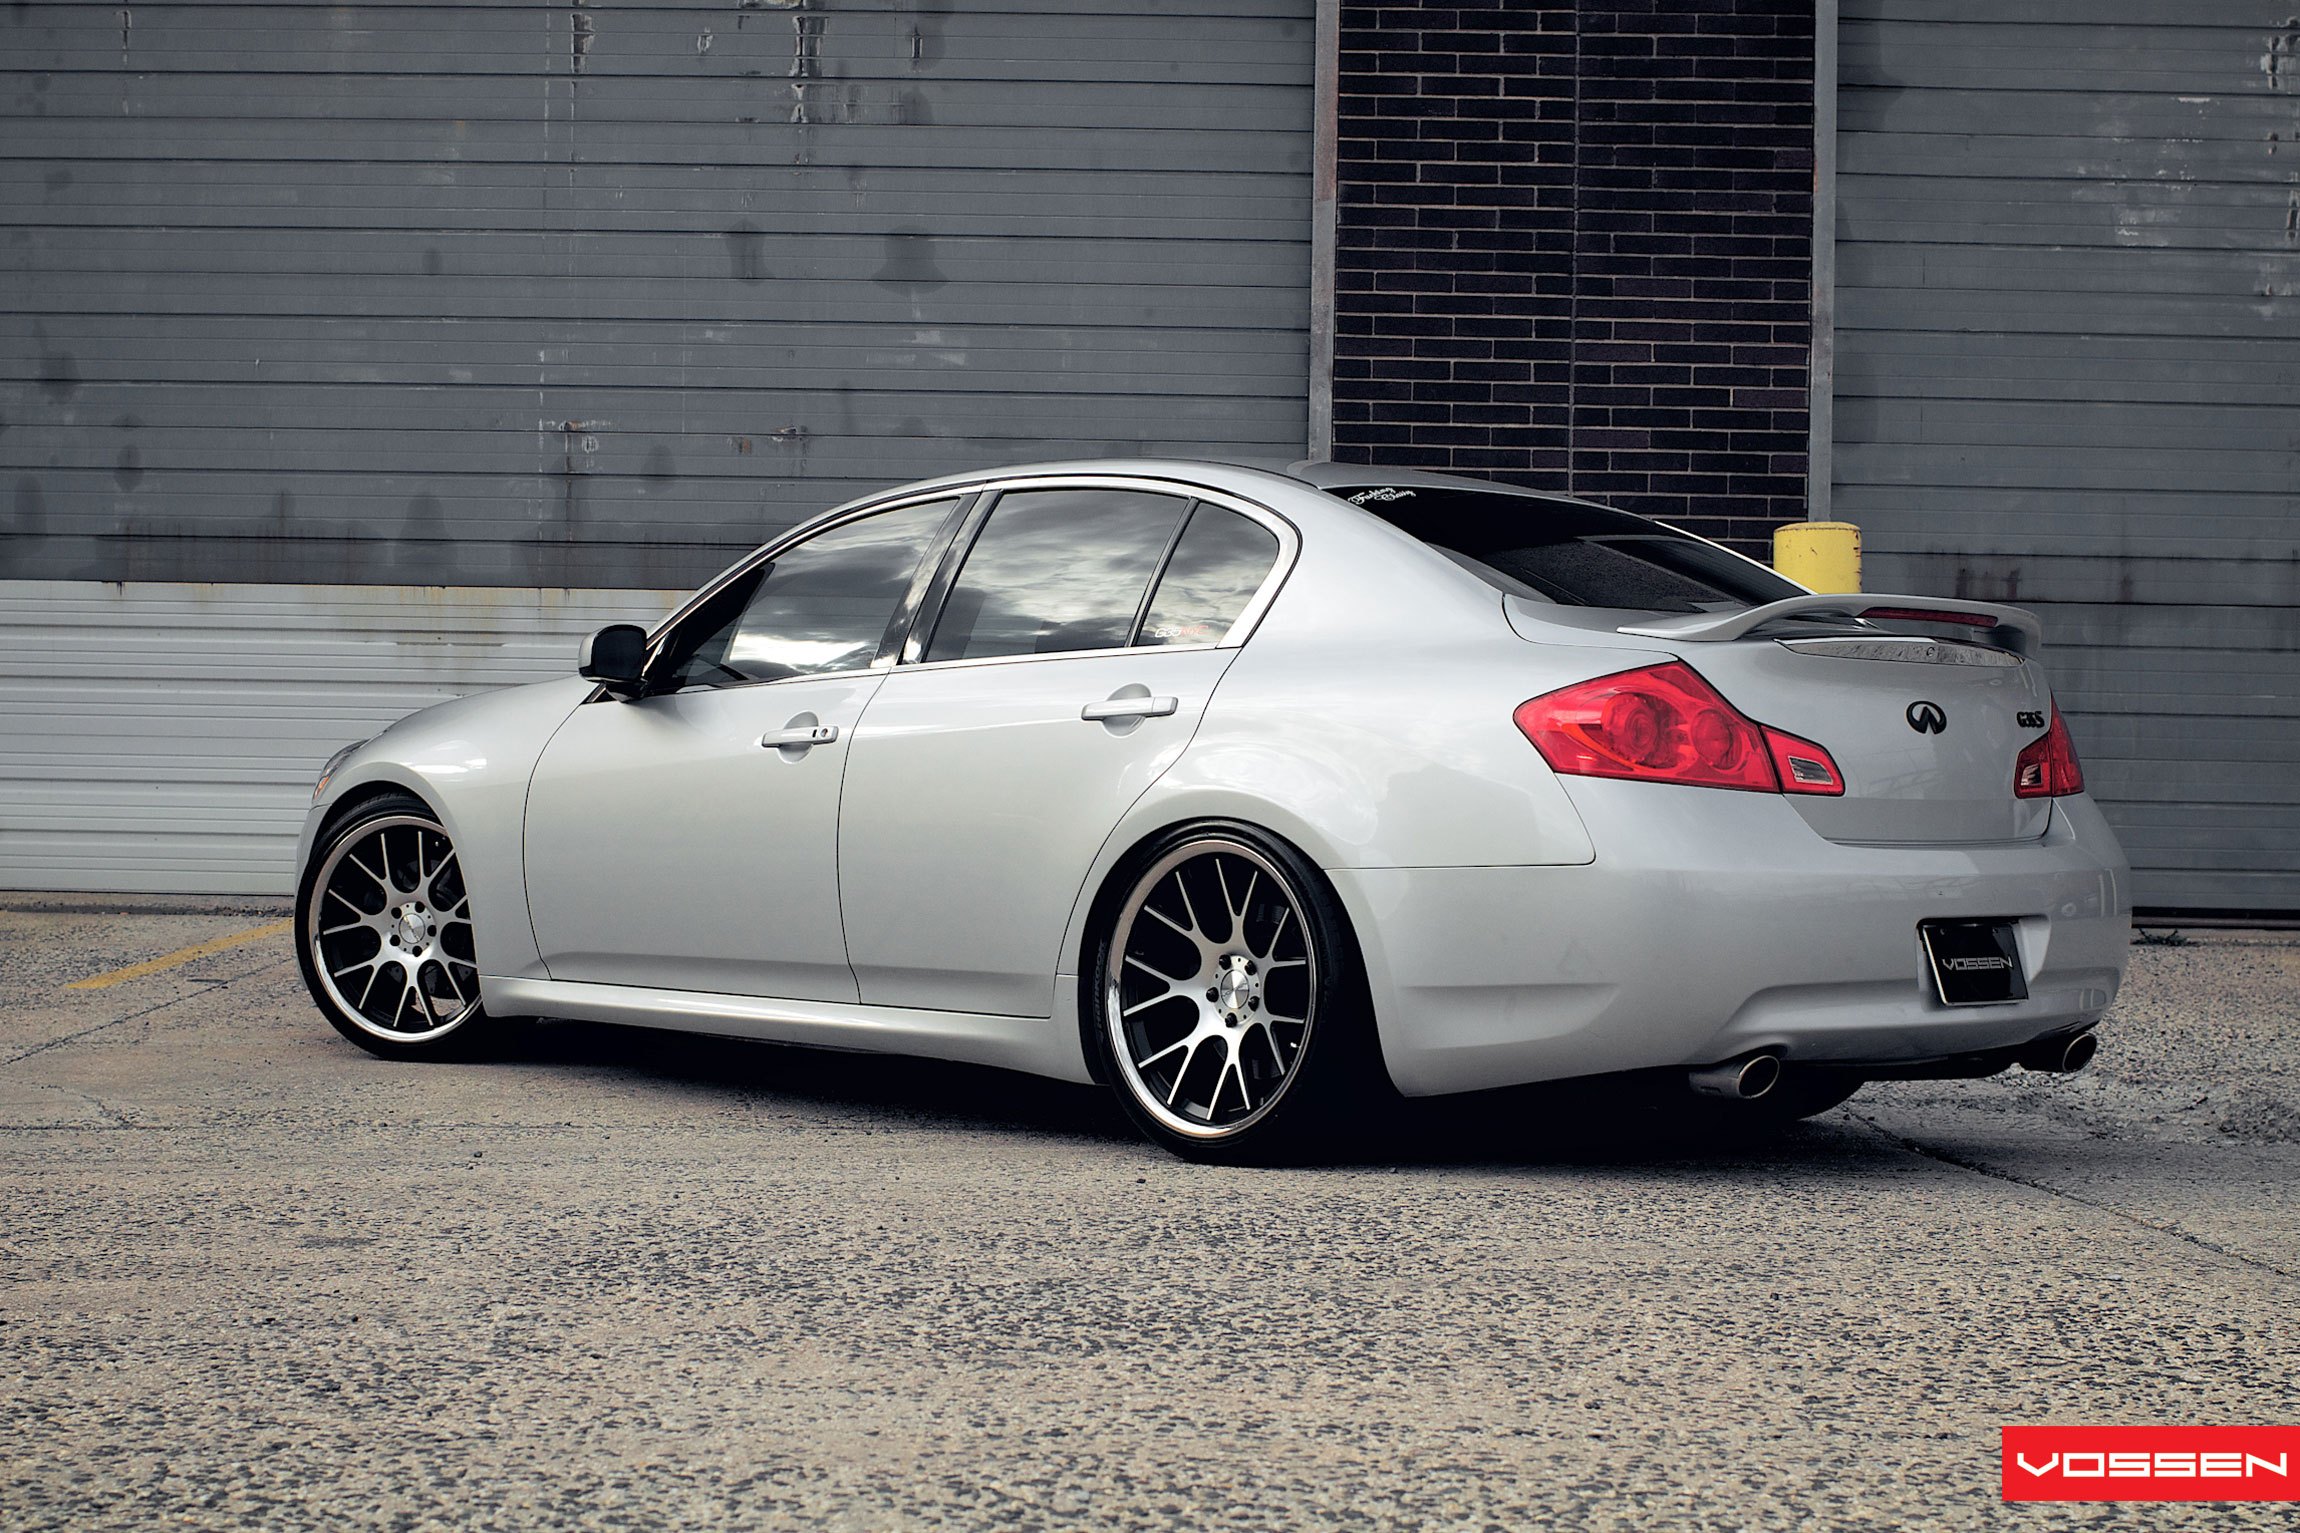 Platinum Metallic Infiniti G37 S with LED Taillights - Photo by Vossen